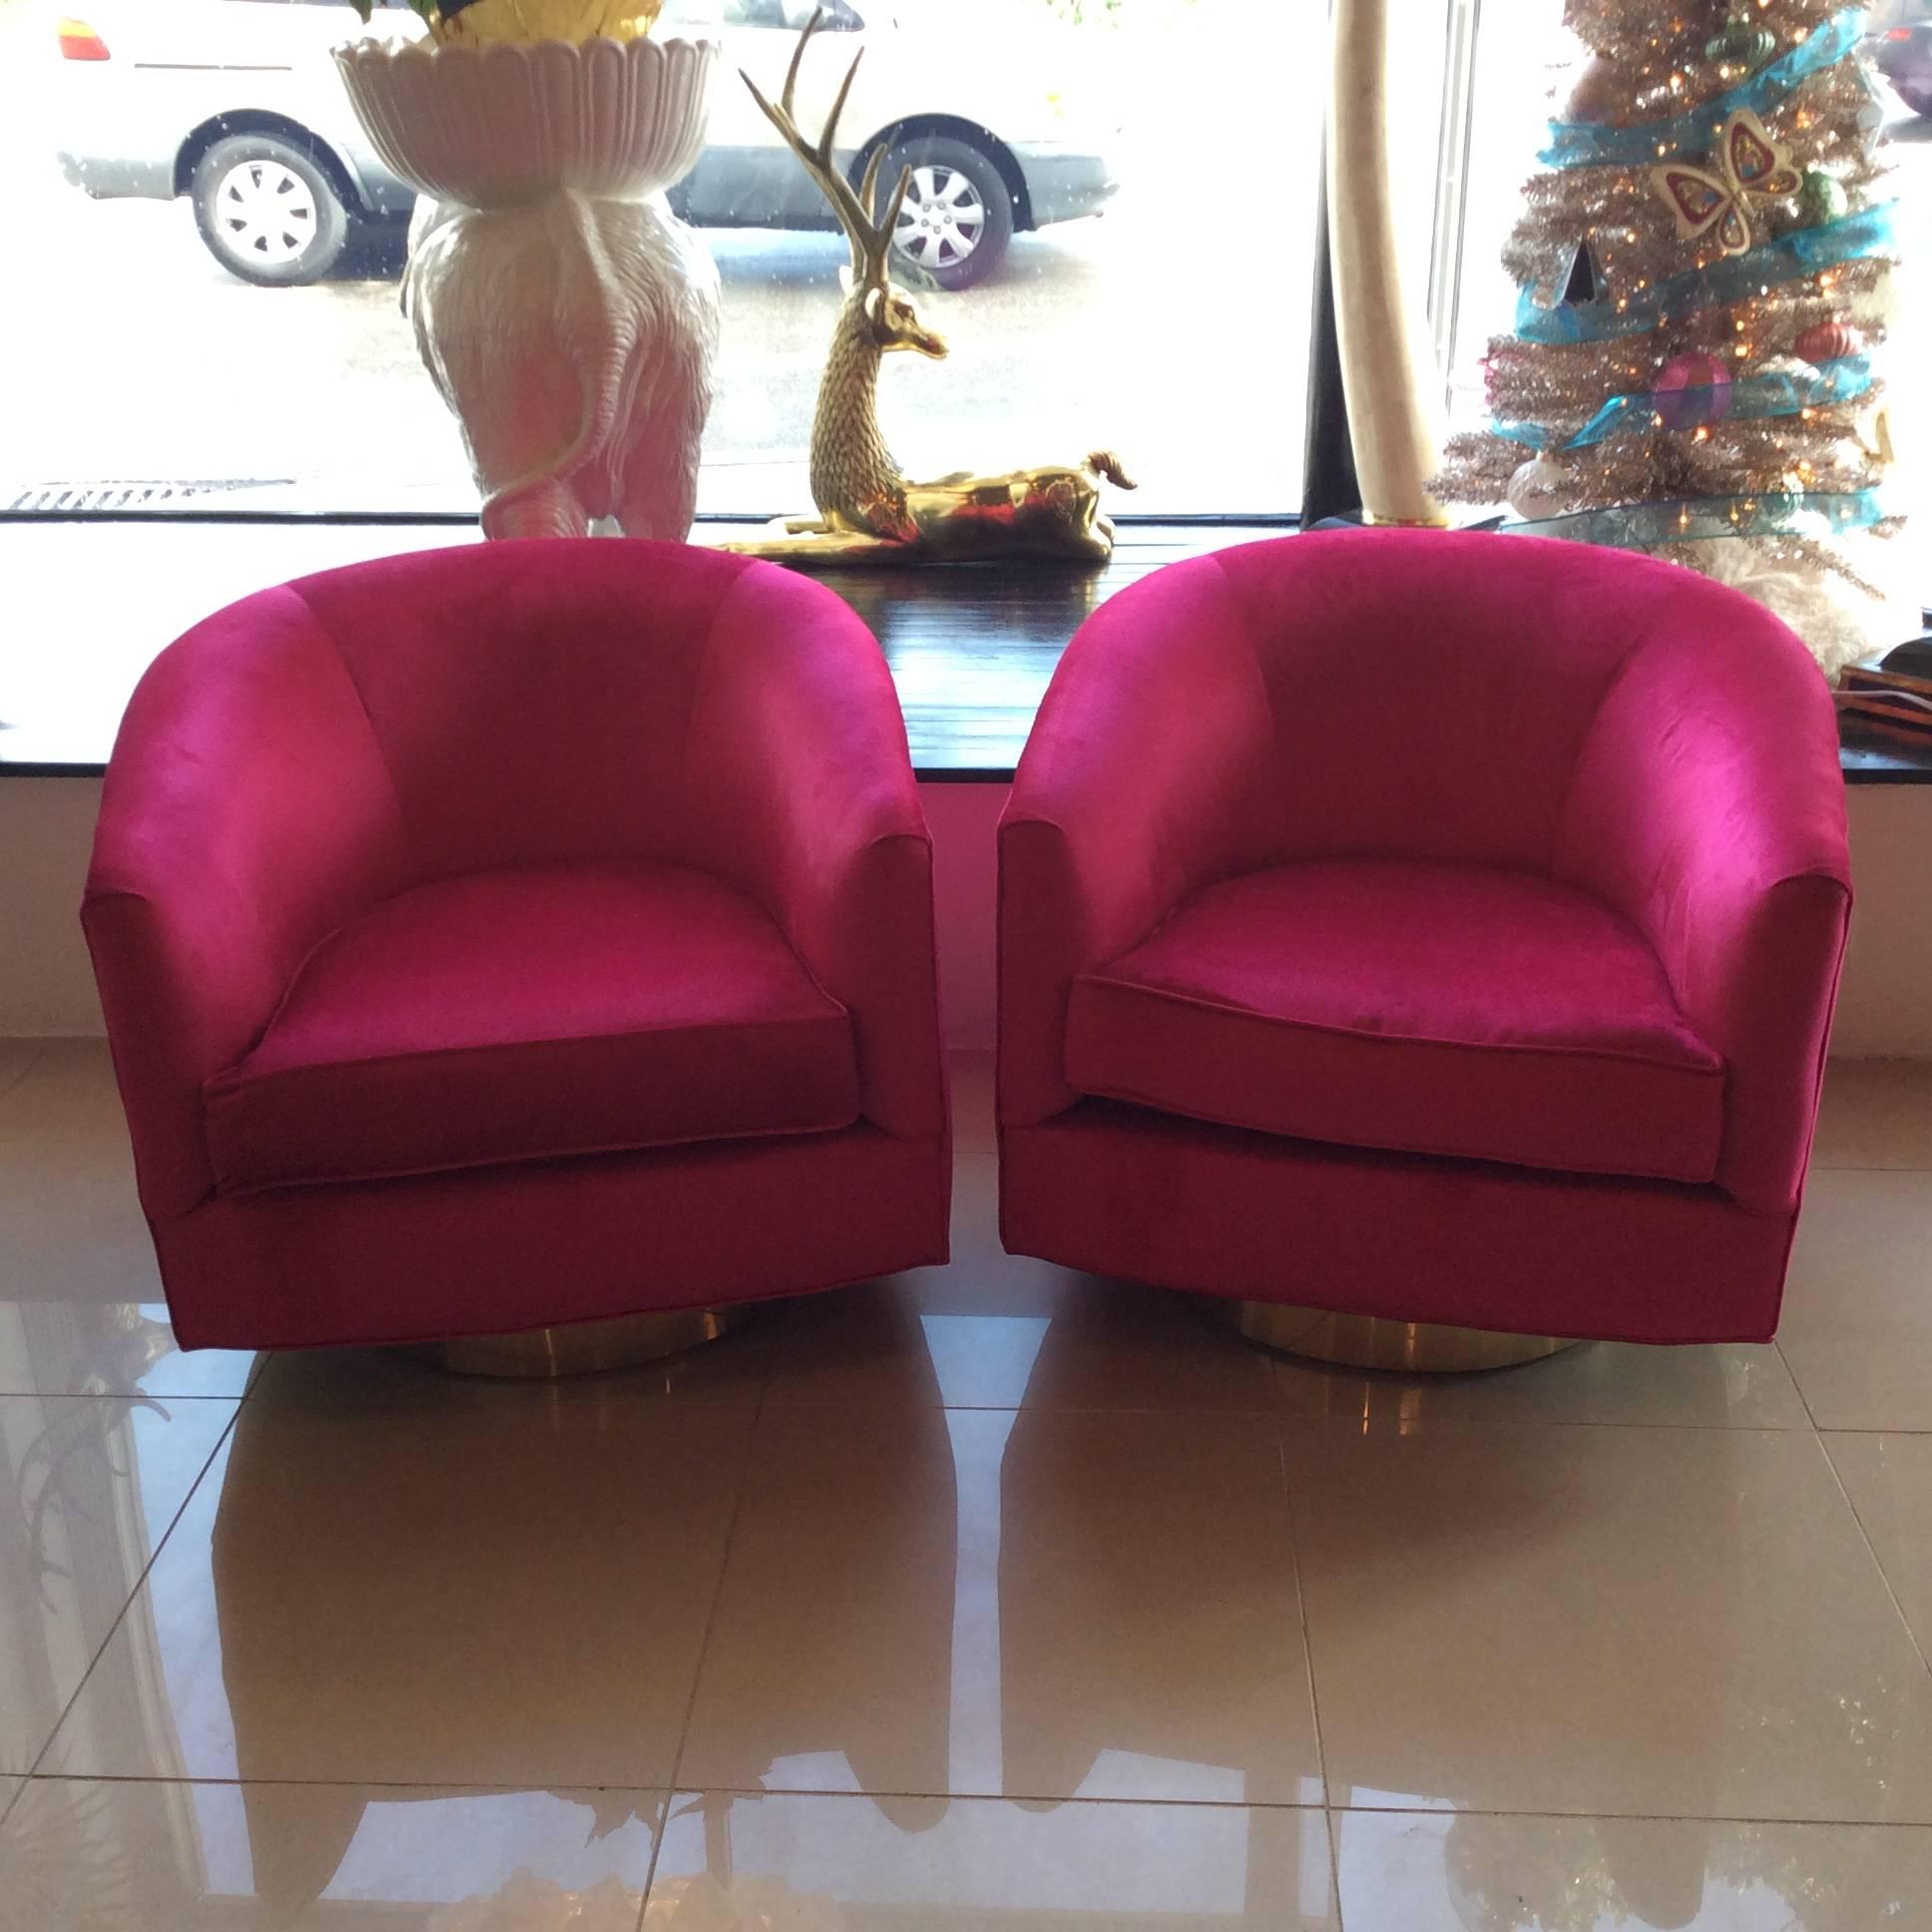 The most amazing vintage Milo Baughman tub, barrel, swivel armchairs, newly upholstered in a hot pink fuchsia velvet fabric with original brass gold platform bases. Great Hollywood Regency chairs!
Cushion depth 20.